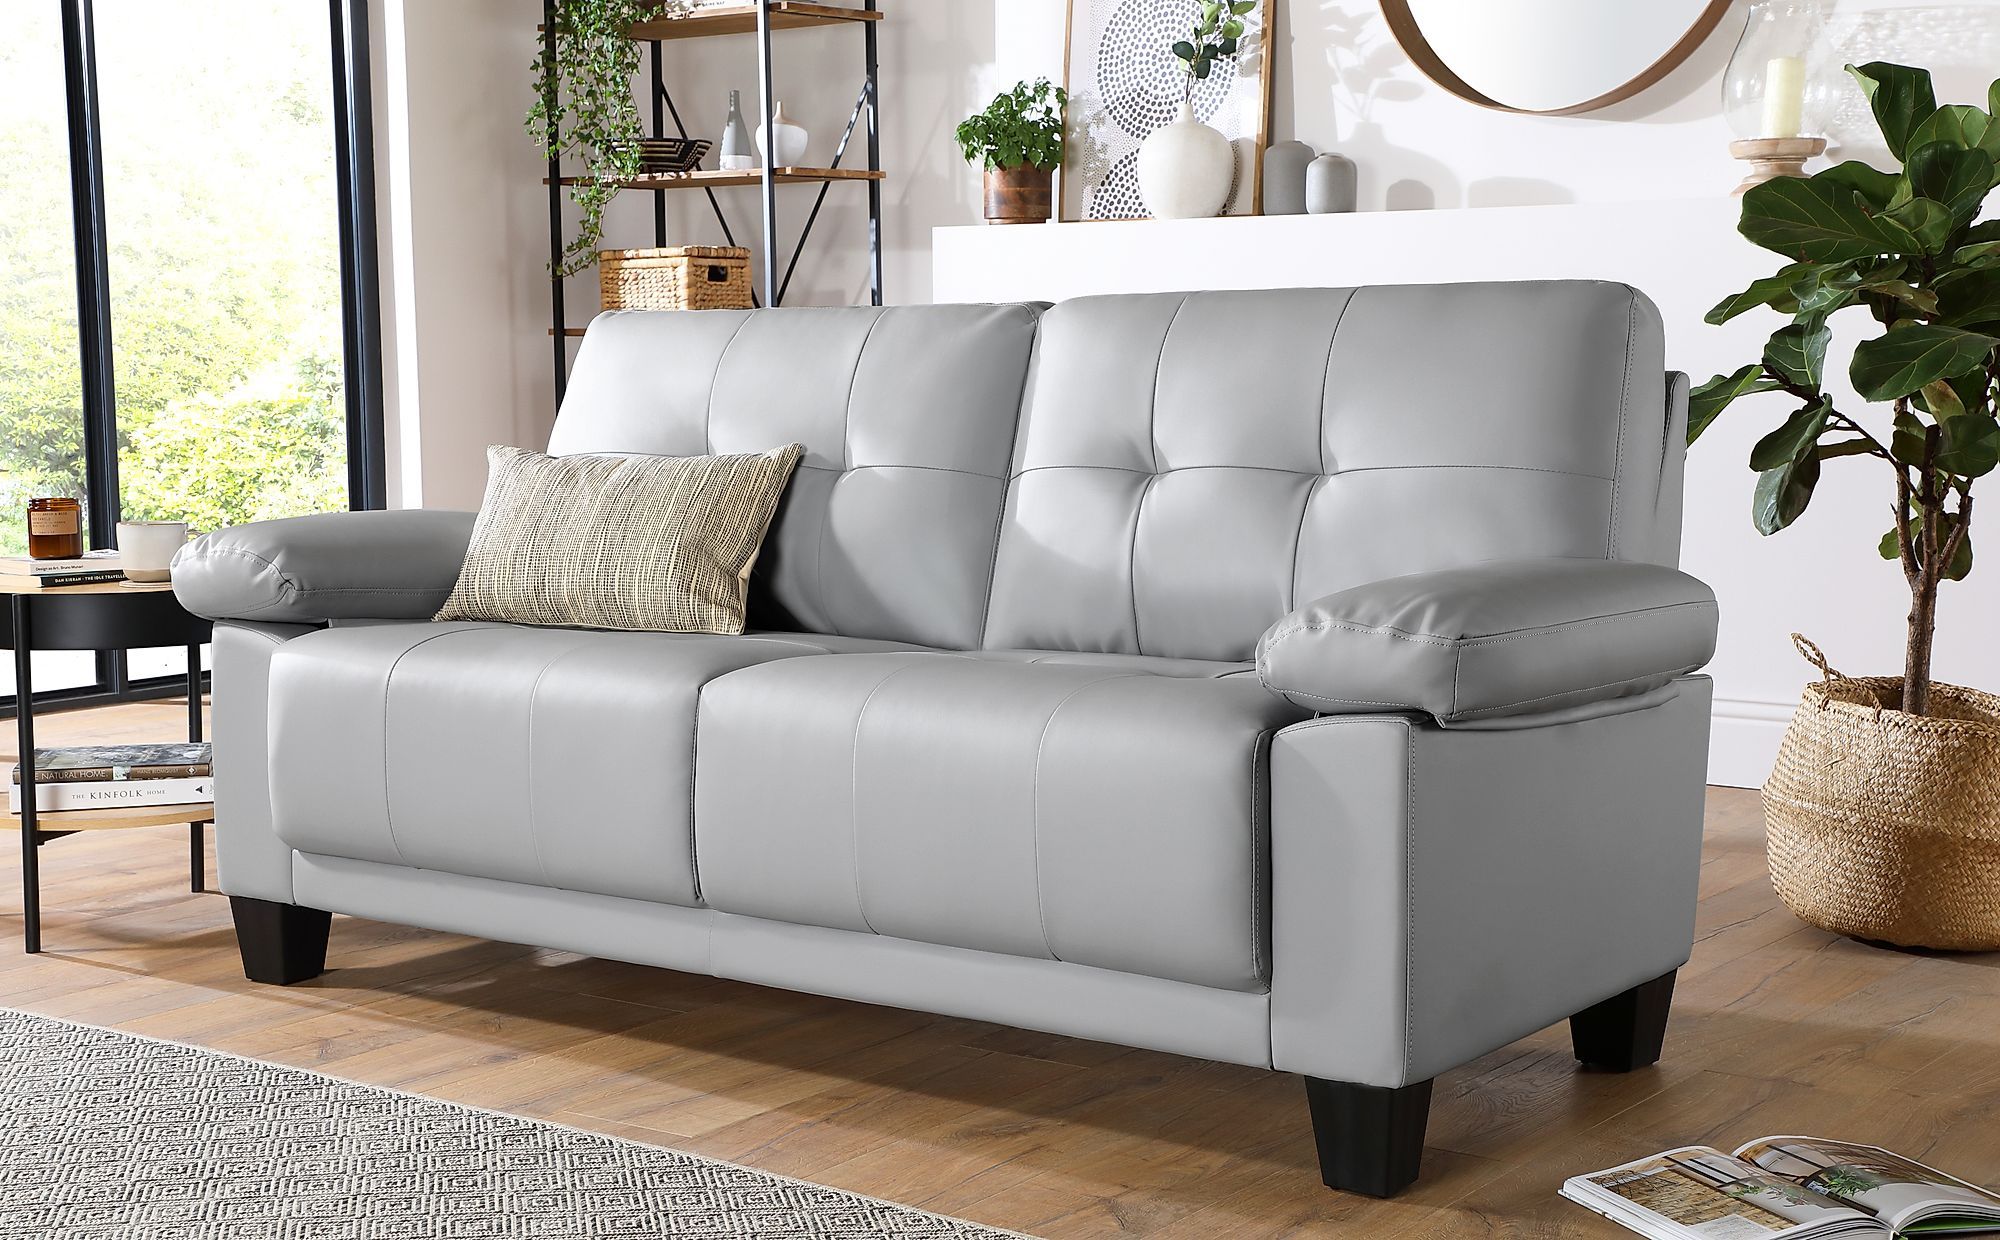 Linton Small Light Grey Leather 3 Seater Sofa | Furniture Choice Throughout Sofas In Light Grey (View 17 of 20)